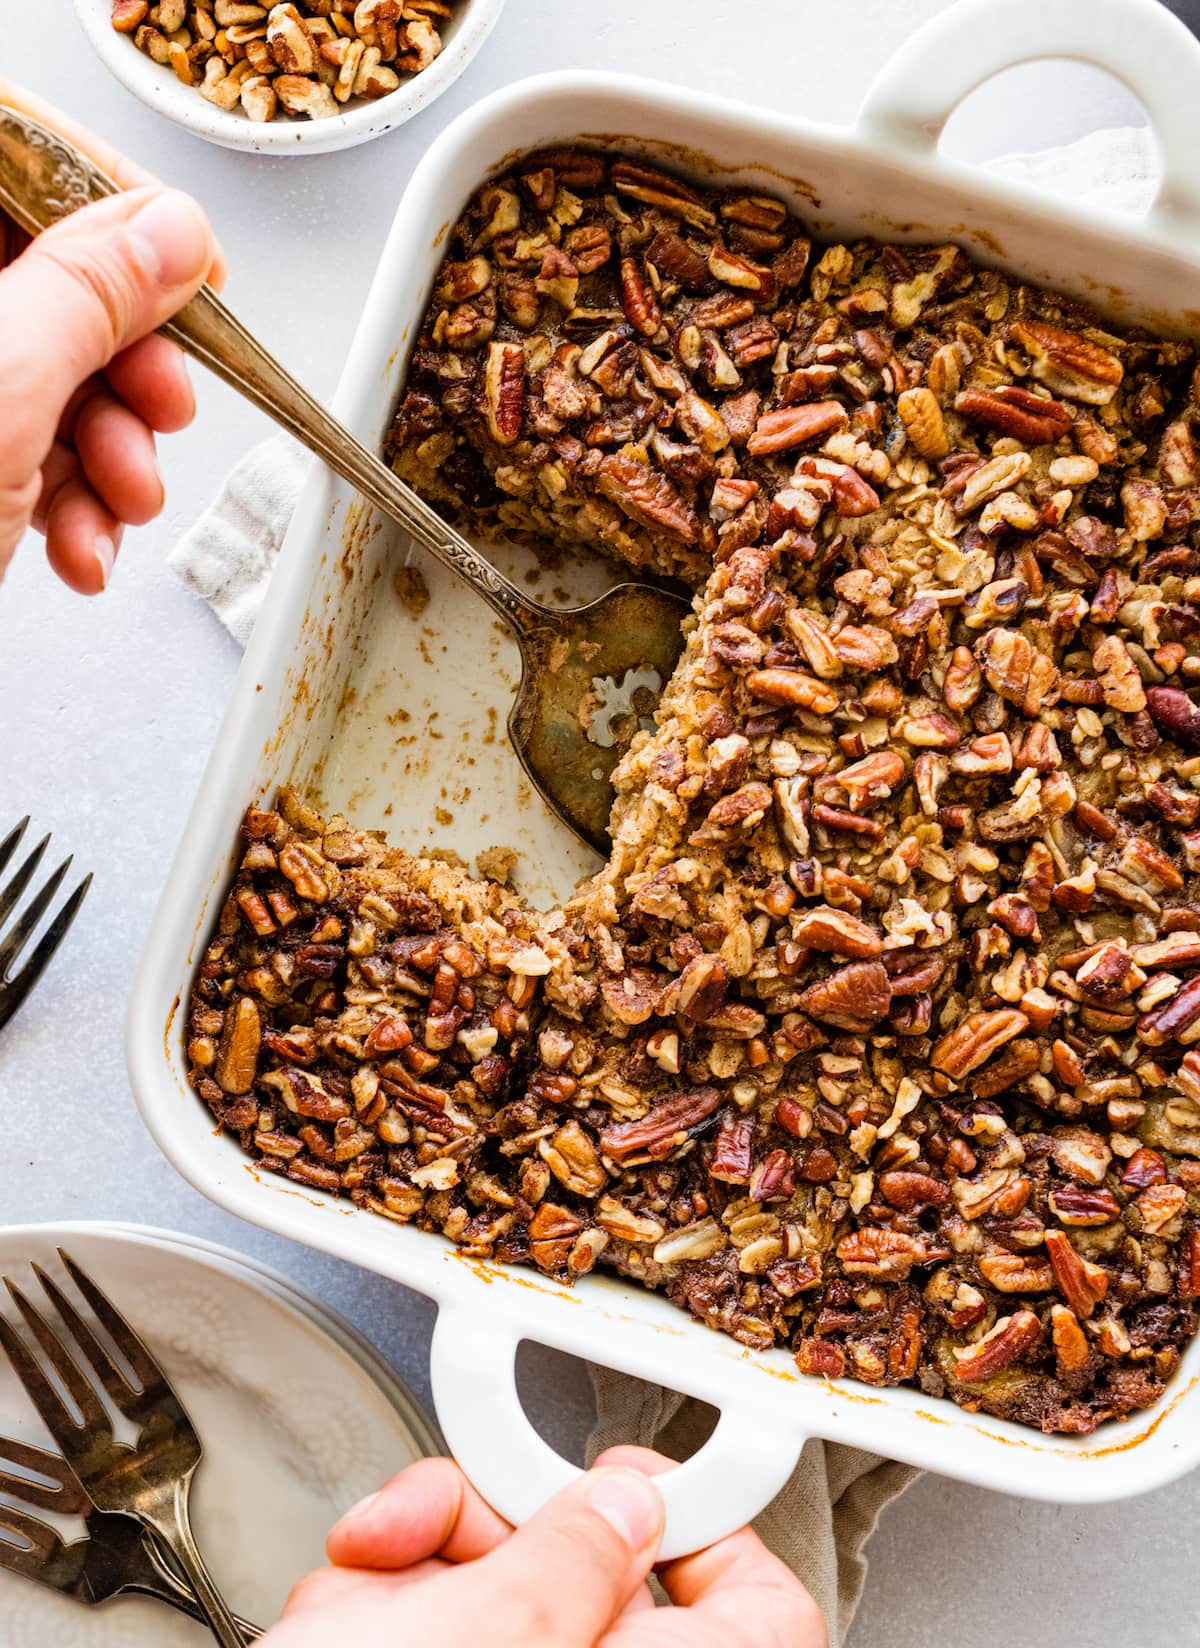 Baked oatmeal topped with chopped nuts in a white square baking dish with a woman's hand removing one slice.